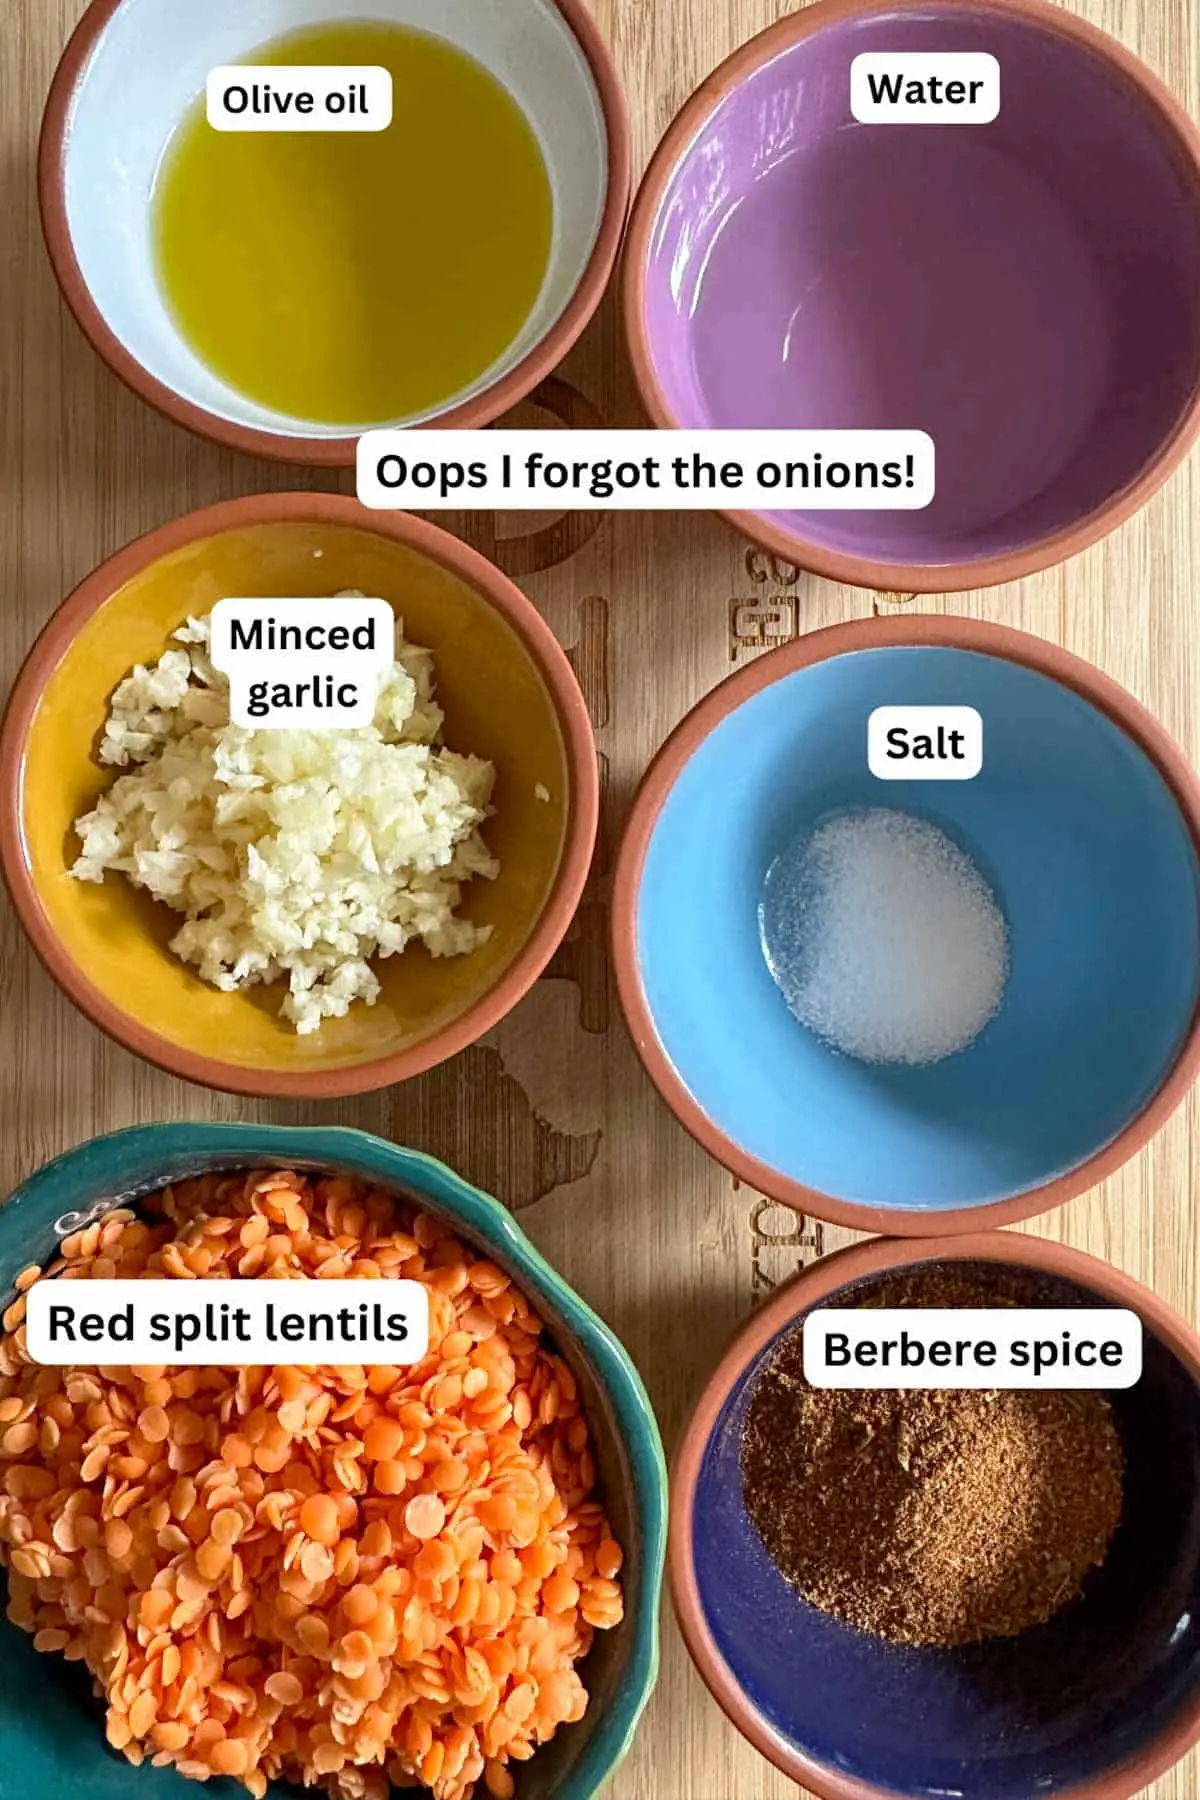 Bowls containing ingredients needed for Ethiopian Red Split Lentil Wat including olive oil, water, minced garlic, salt, red split lentils, and Berbere spice. There is text overlay stating "oops I forgot the onions!"